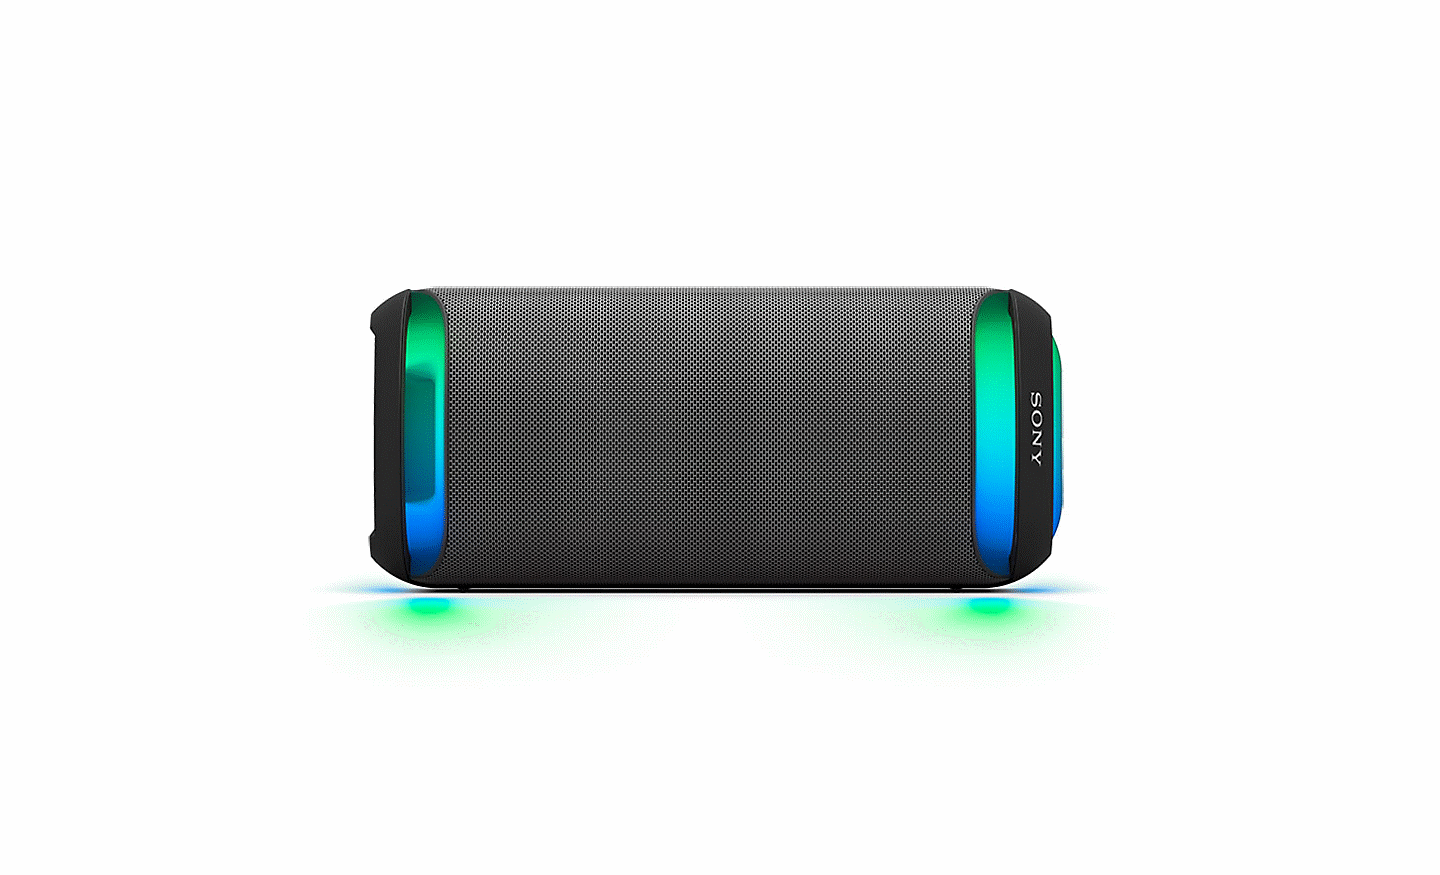 Image of the SRS-XV800 Wireless Party Speaker lying horizontally with green and blue ambient lighting